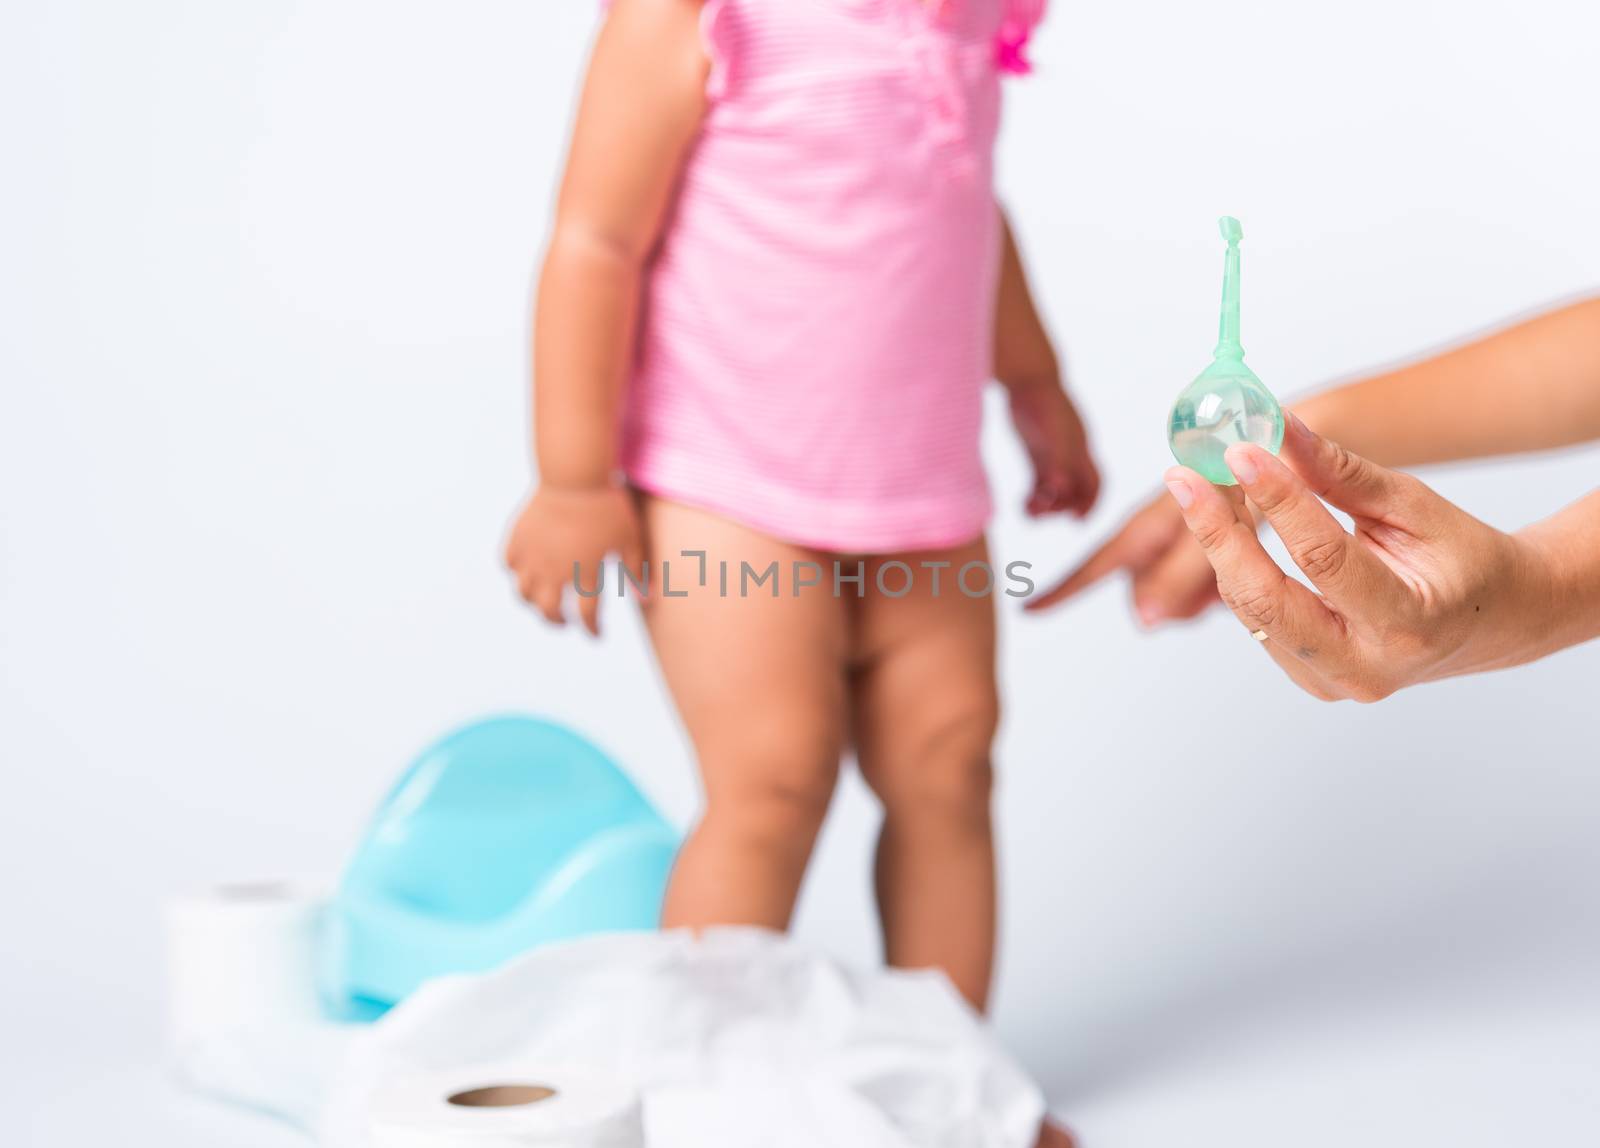 Asian little cute baby child girl training to sitting on blue chamber pot or potty her problem cannot shit and mother use Enema for help, studio shot isolated on white background, wc toilet concept